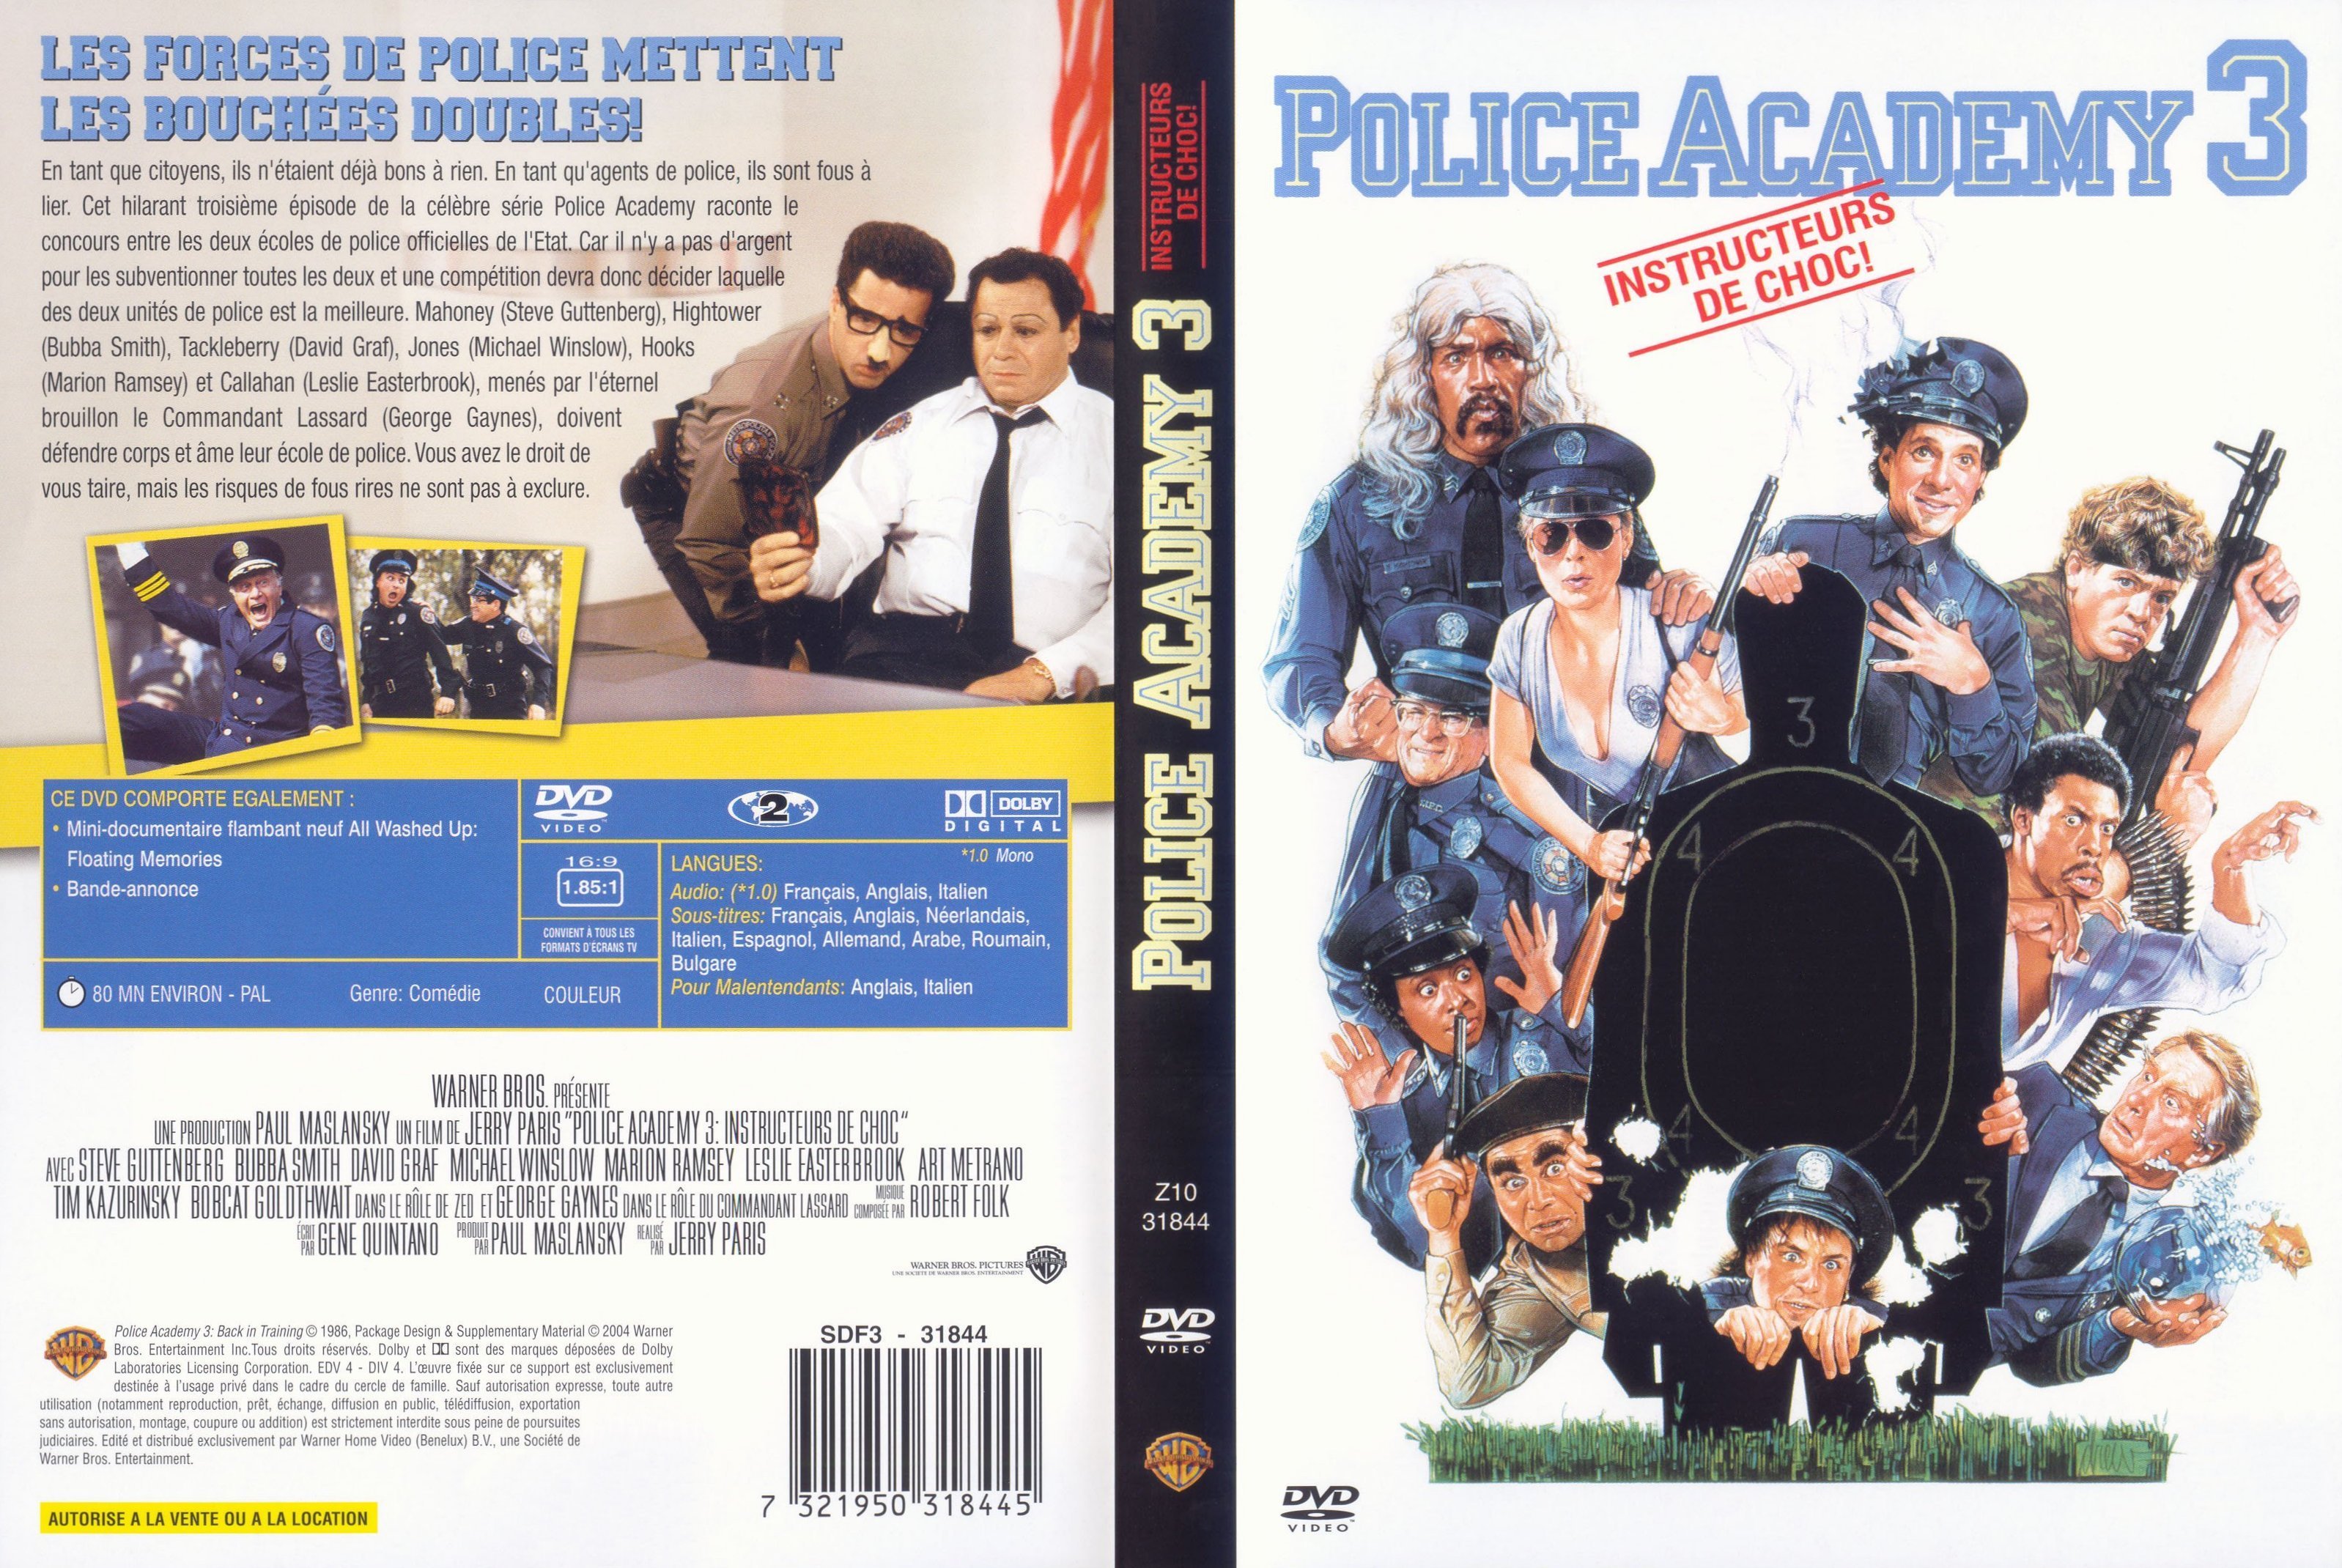 Jaquette DVD Police academy 3